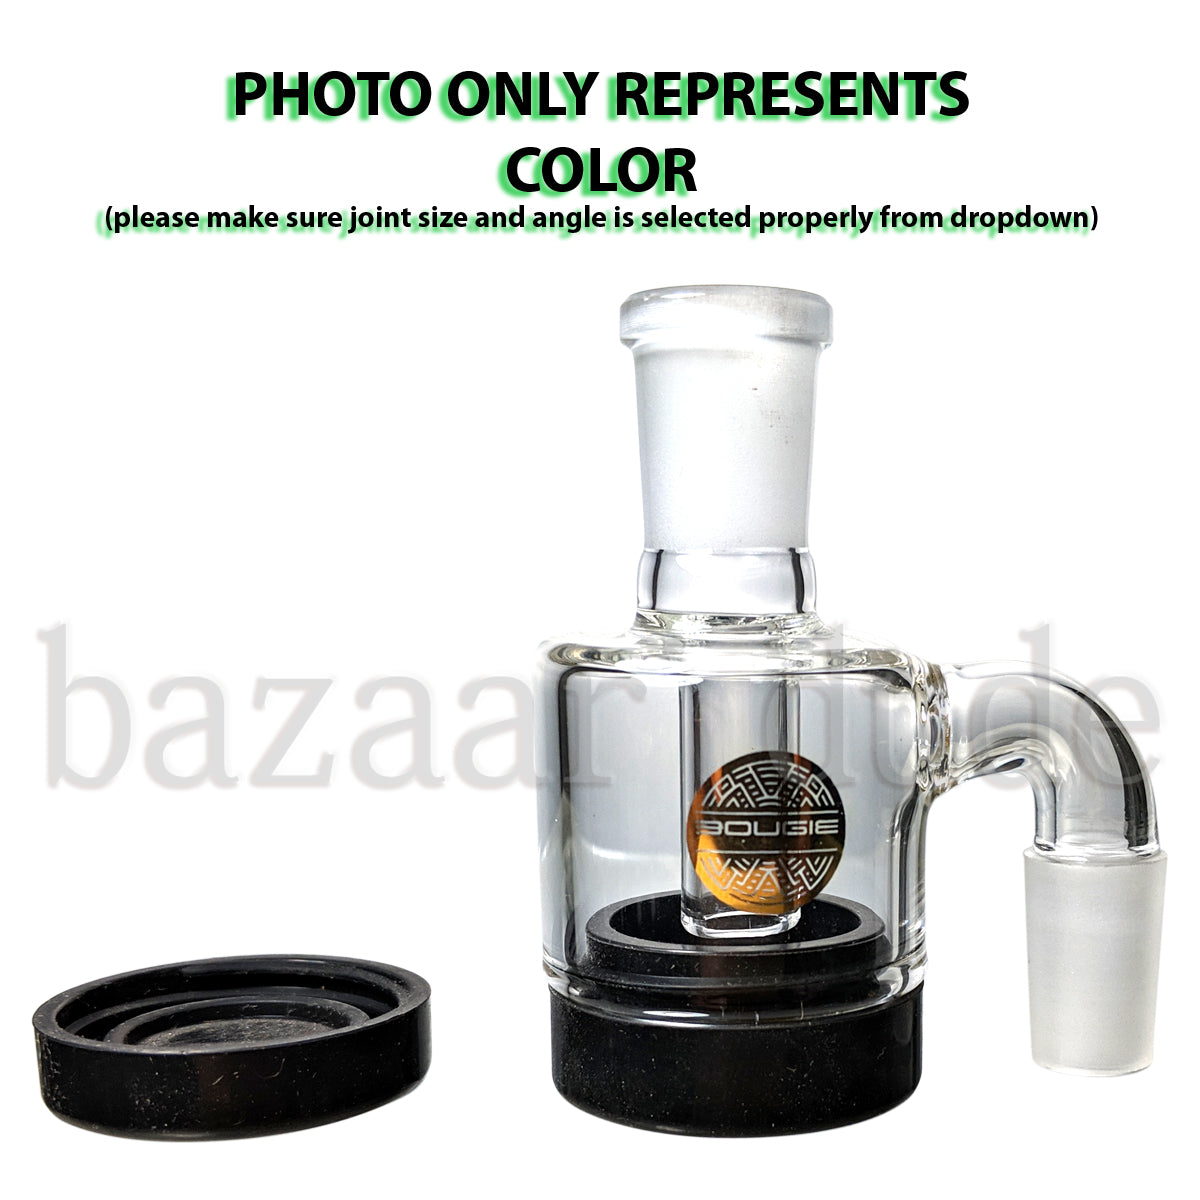 14mm Male 45 degree Reclaim Catcher Banger with Silicone Jar Set - Silicone  Bong